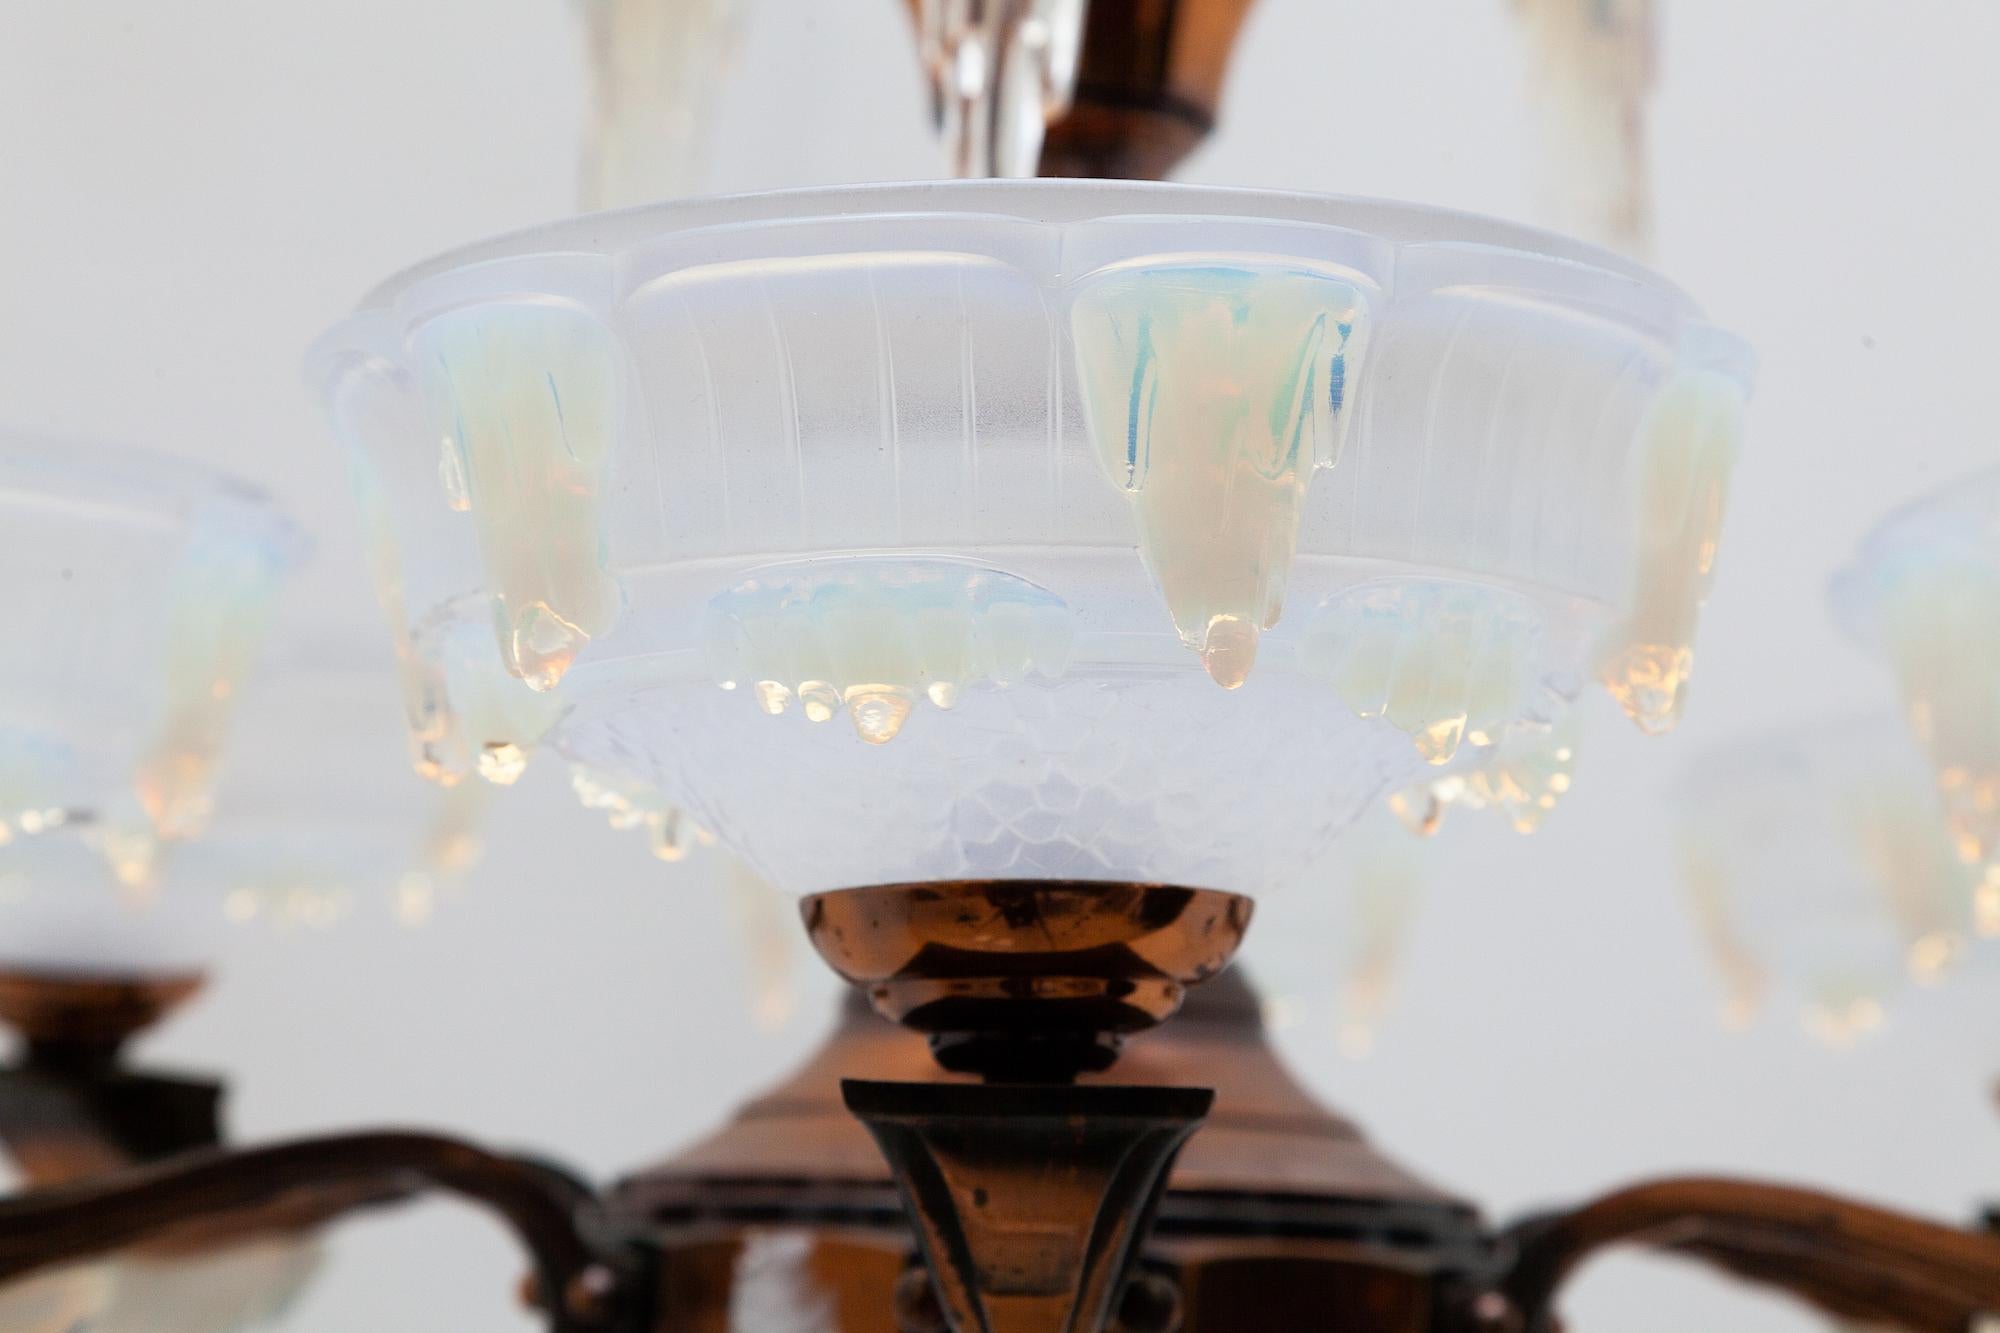 Large molded opalescent frosted art glass, six-arm chandelier by Ezan Petiot, France, 1930s. Smokey brass frame with decorative milk glass drops formed like snow caps or icicles.
In overall excellent condition, dimensions: 80 diameter x 85 height